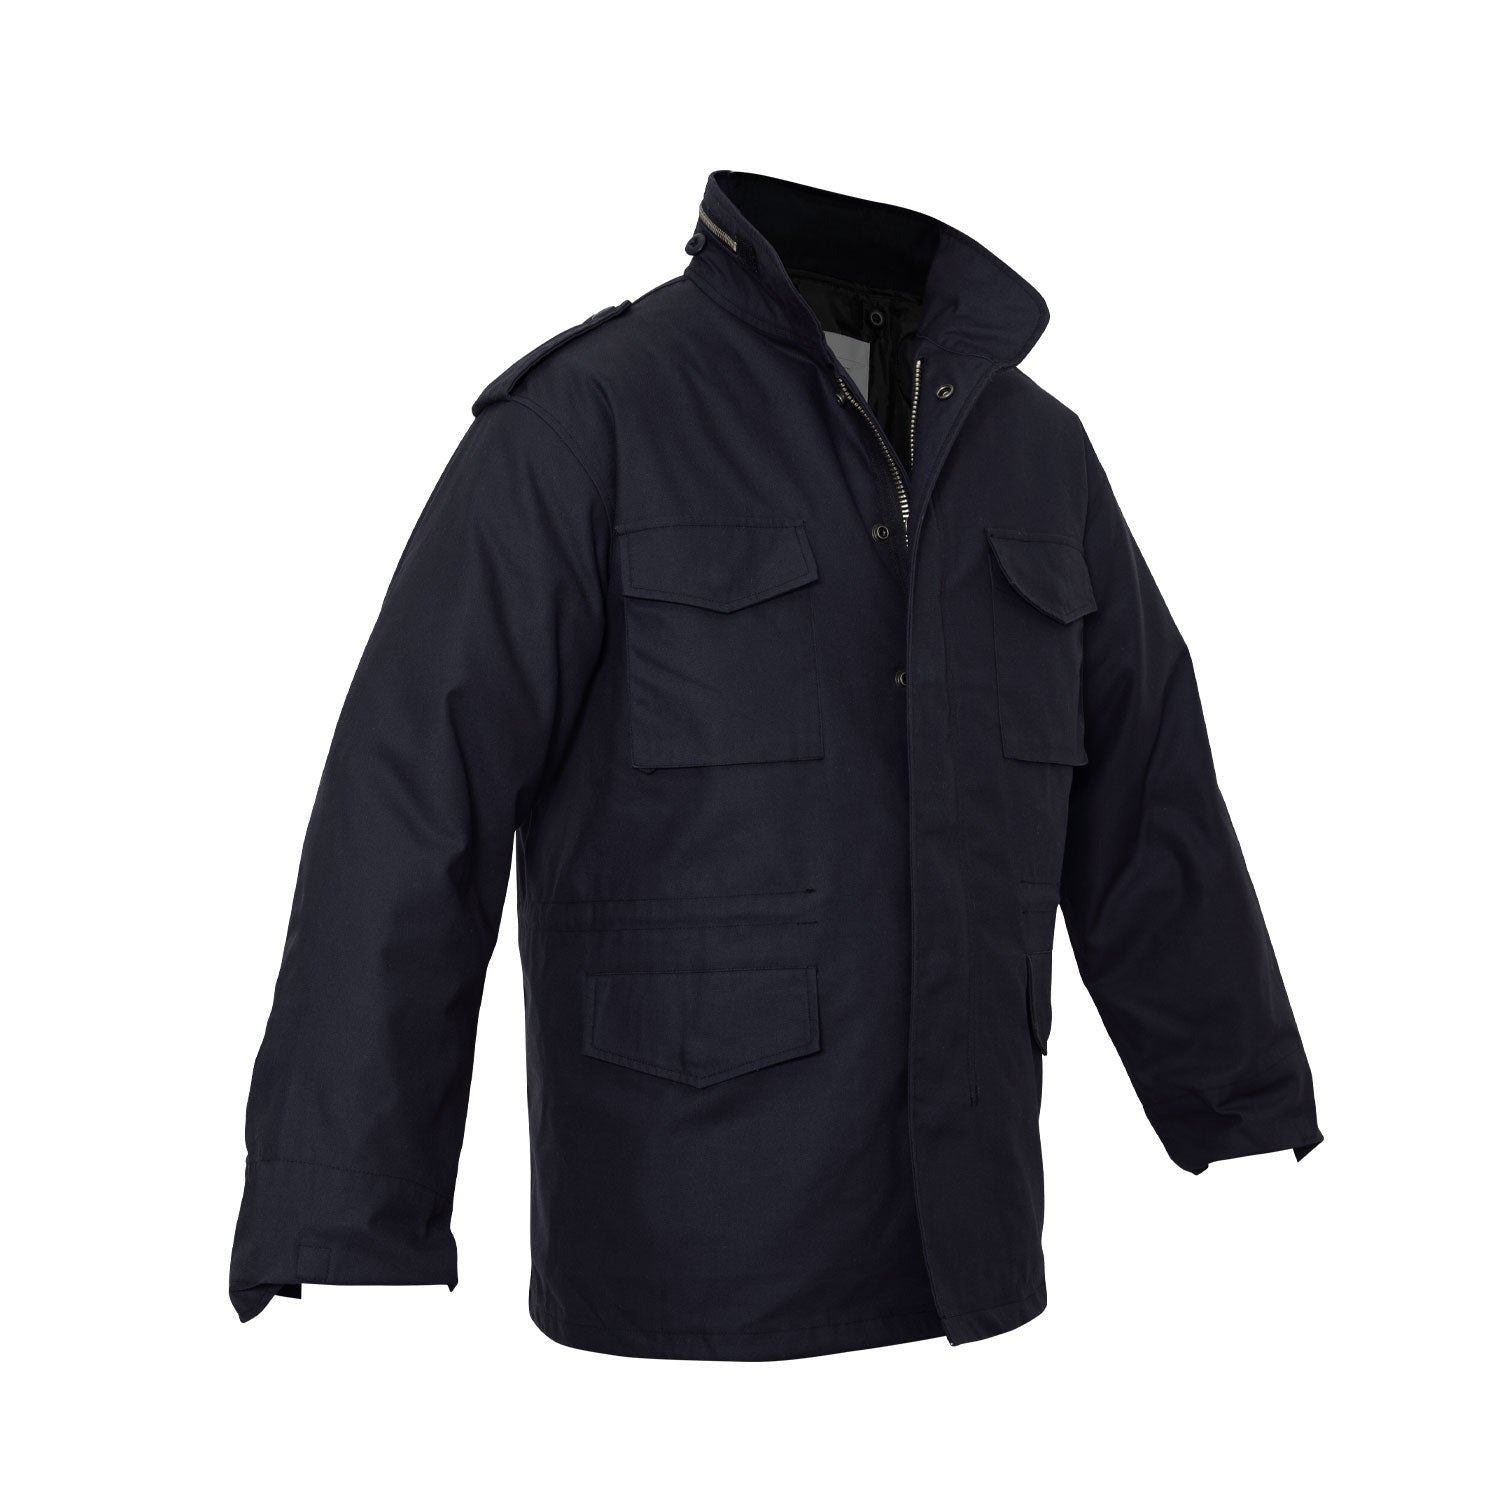 Water Repellent Cotton / Polyester Twill Exterior Aids In Protection From Wind, Rain, And Other Outdoor Elements Quilted Button-In Liner Provides Added Warmth Which Can Be Removed For A Lightweight M-65 Jacket And Liner Can Be Worn Alone As A Jacket – The Perfect All Seasons Jacket The Classic M-65 Jacket Is Designed To Government Specifications